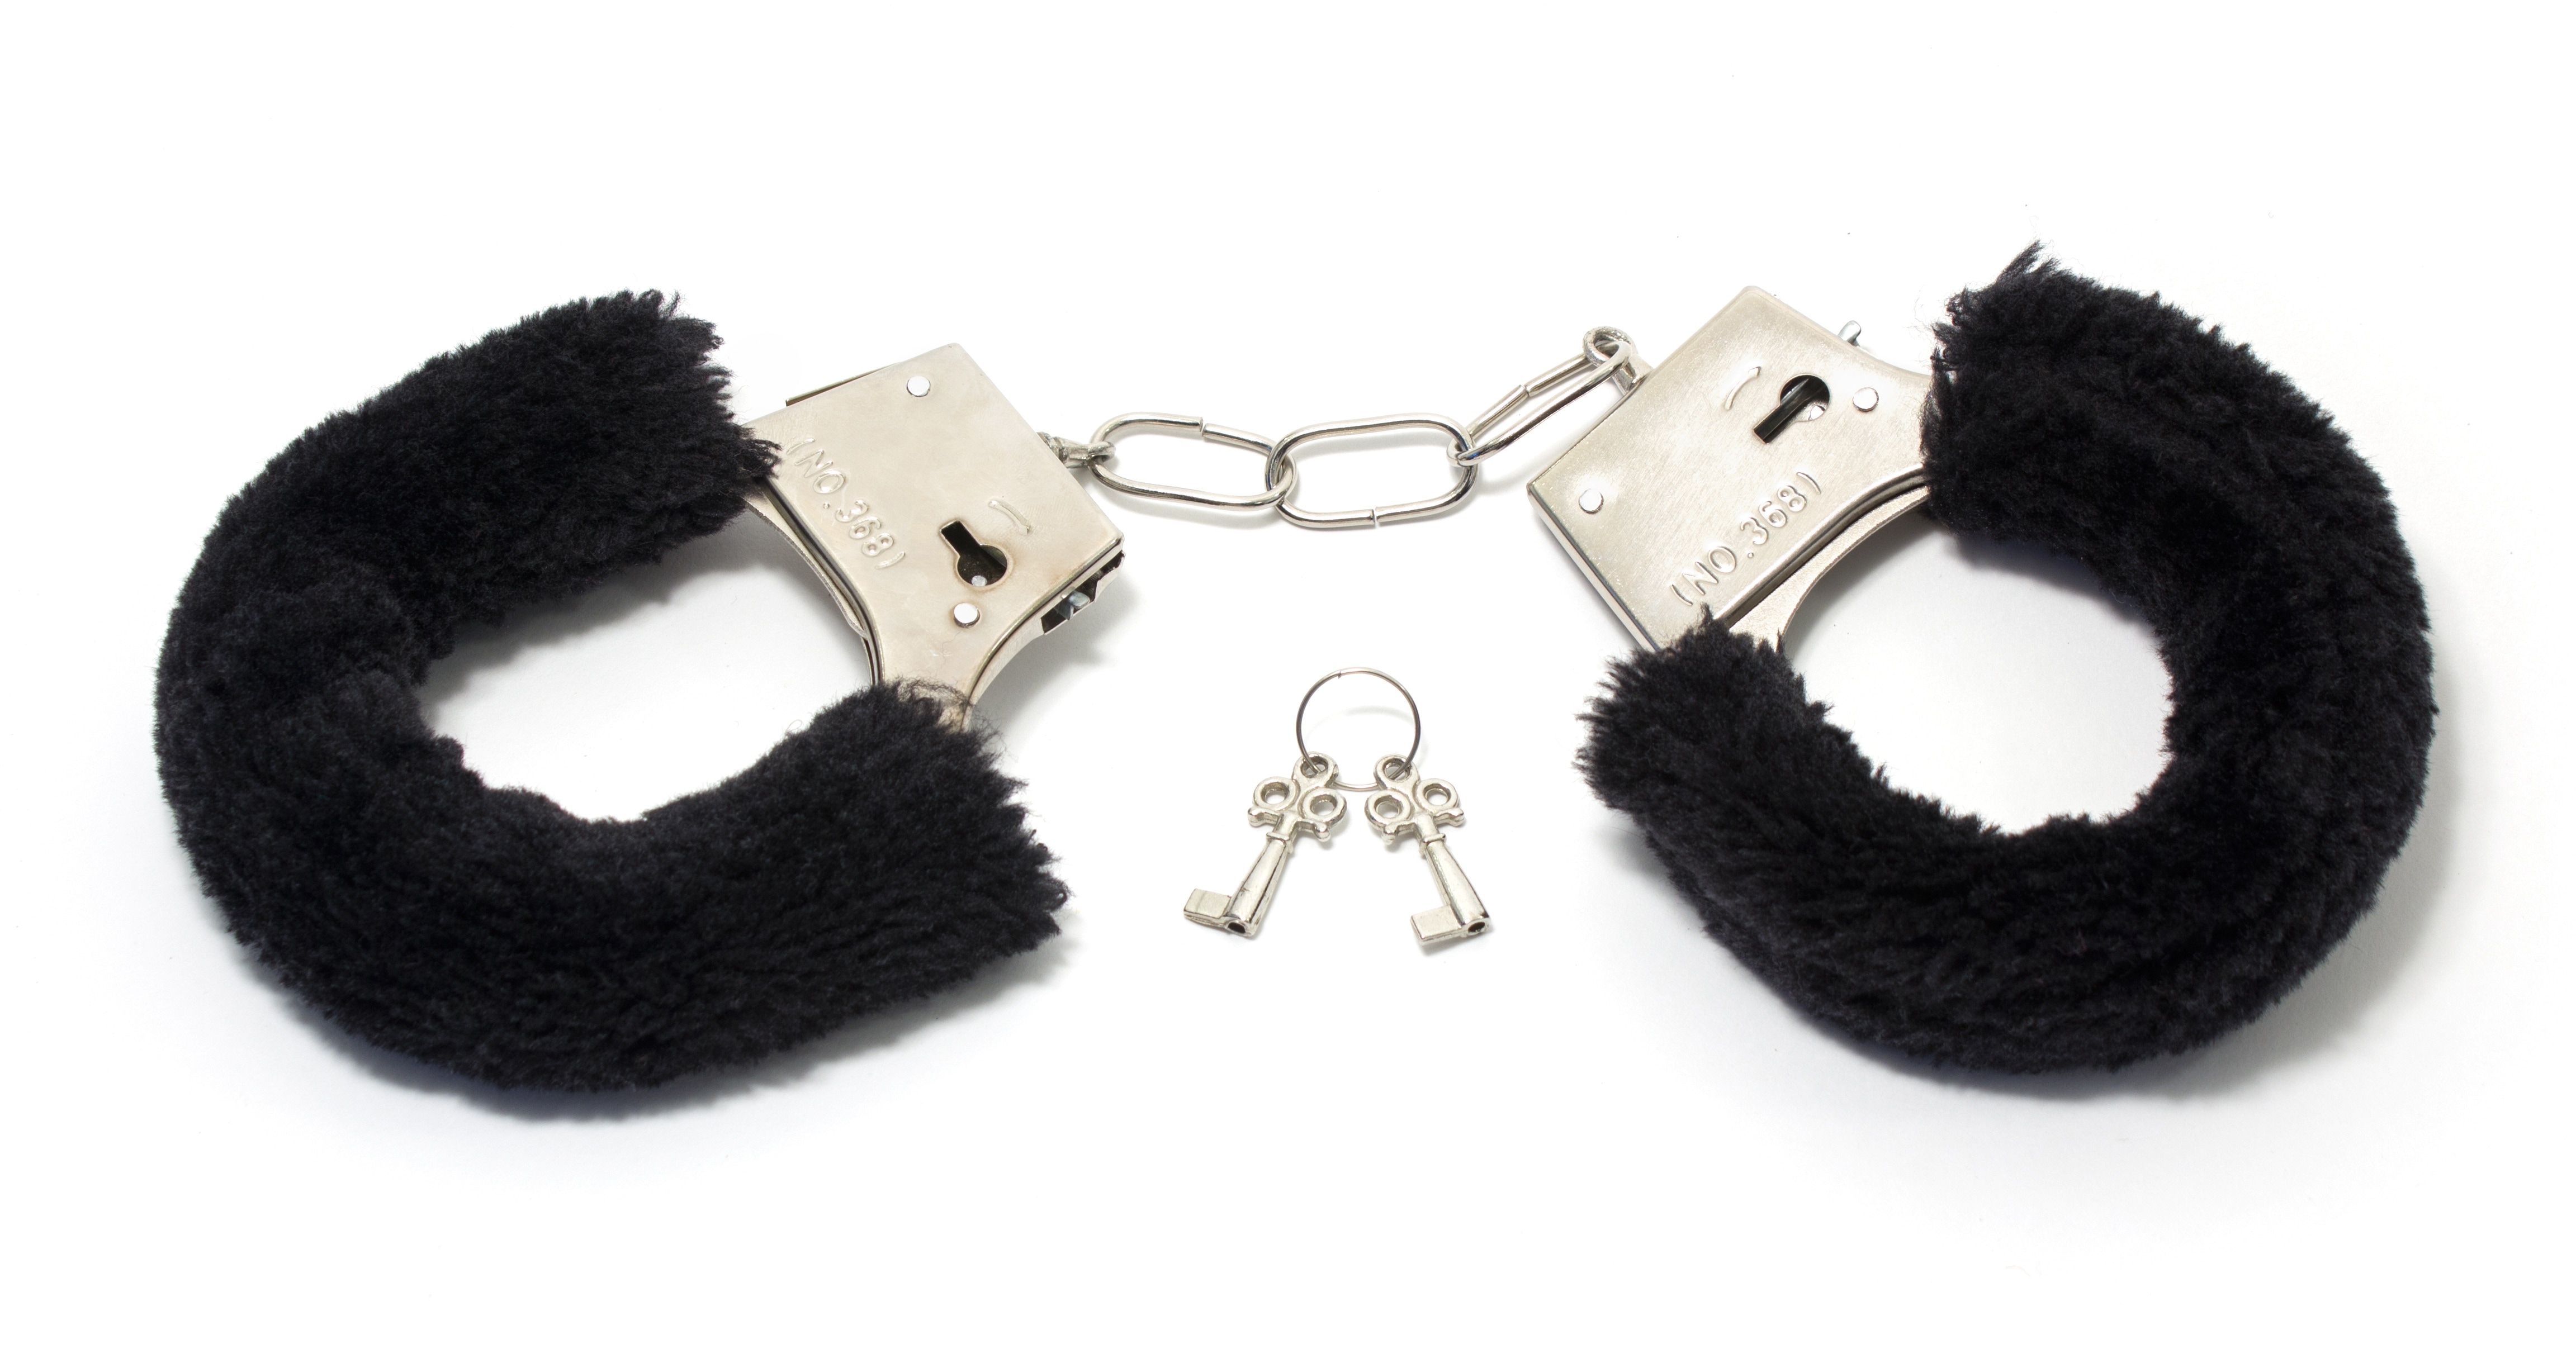 Black Fur And Stainless Steel Handcuffs And Keys - Sex Toy , HD Wallpaper & Backgrounds